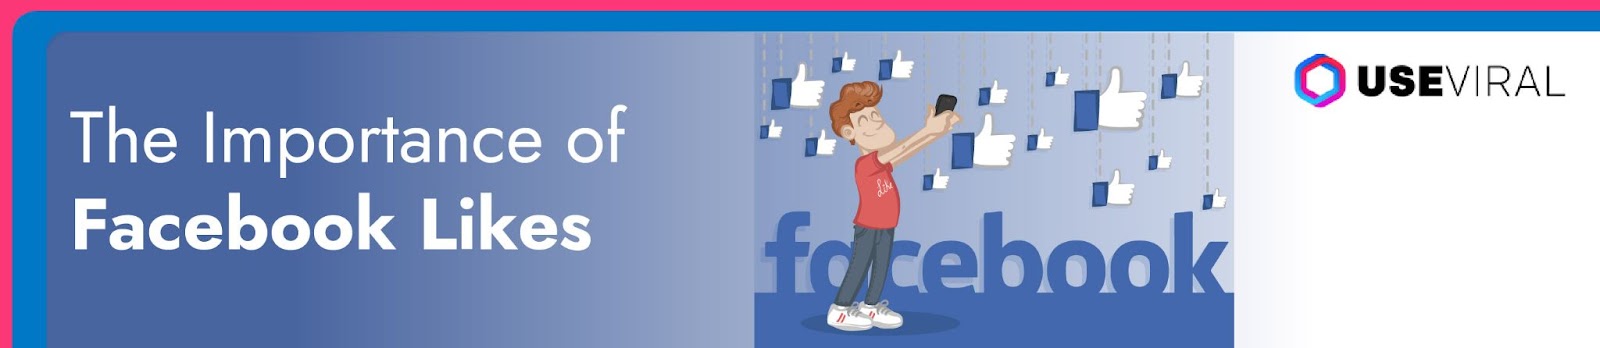 The Importance of Facebook Likes